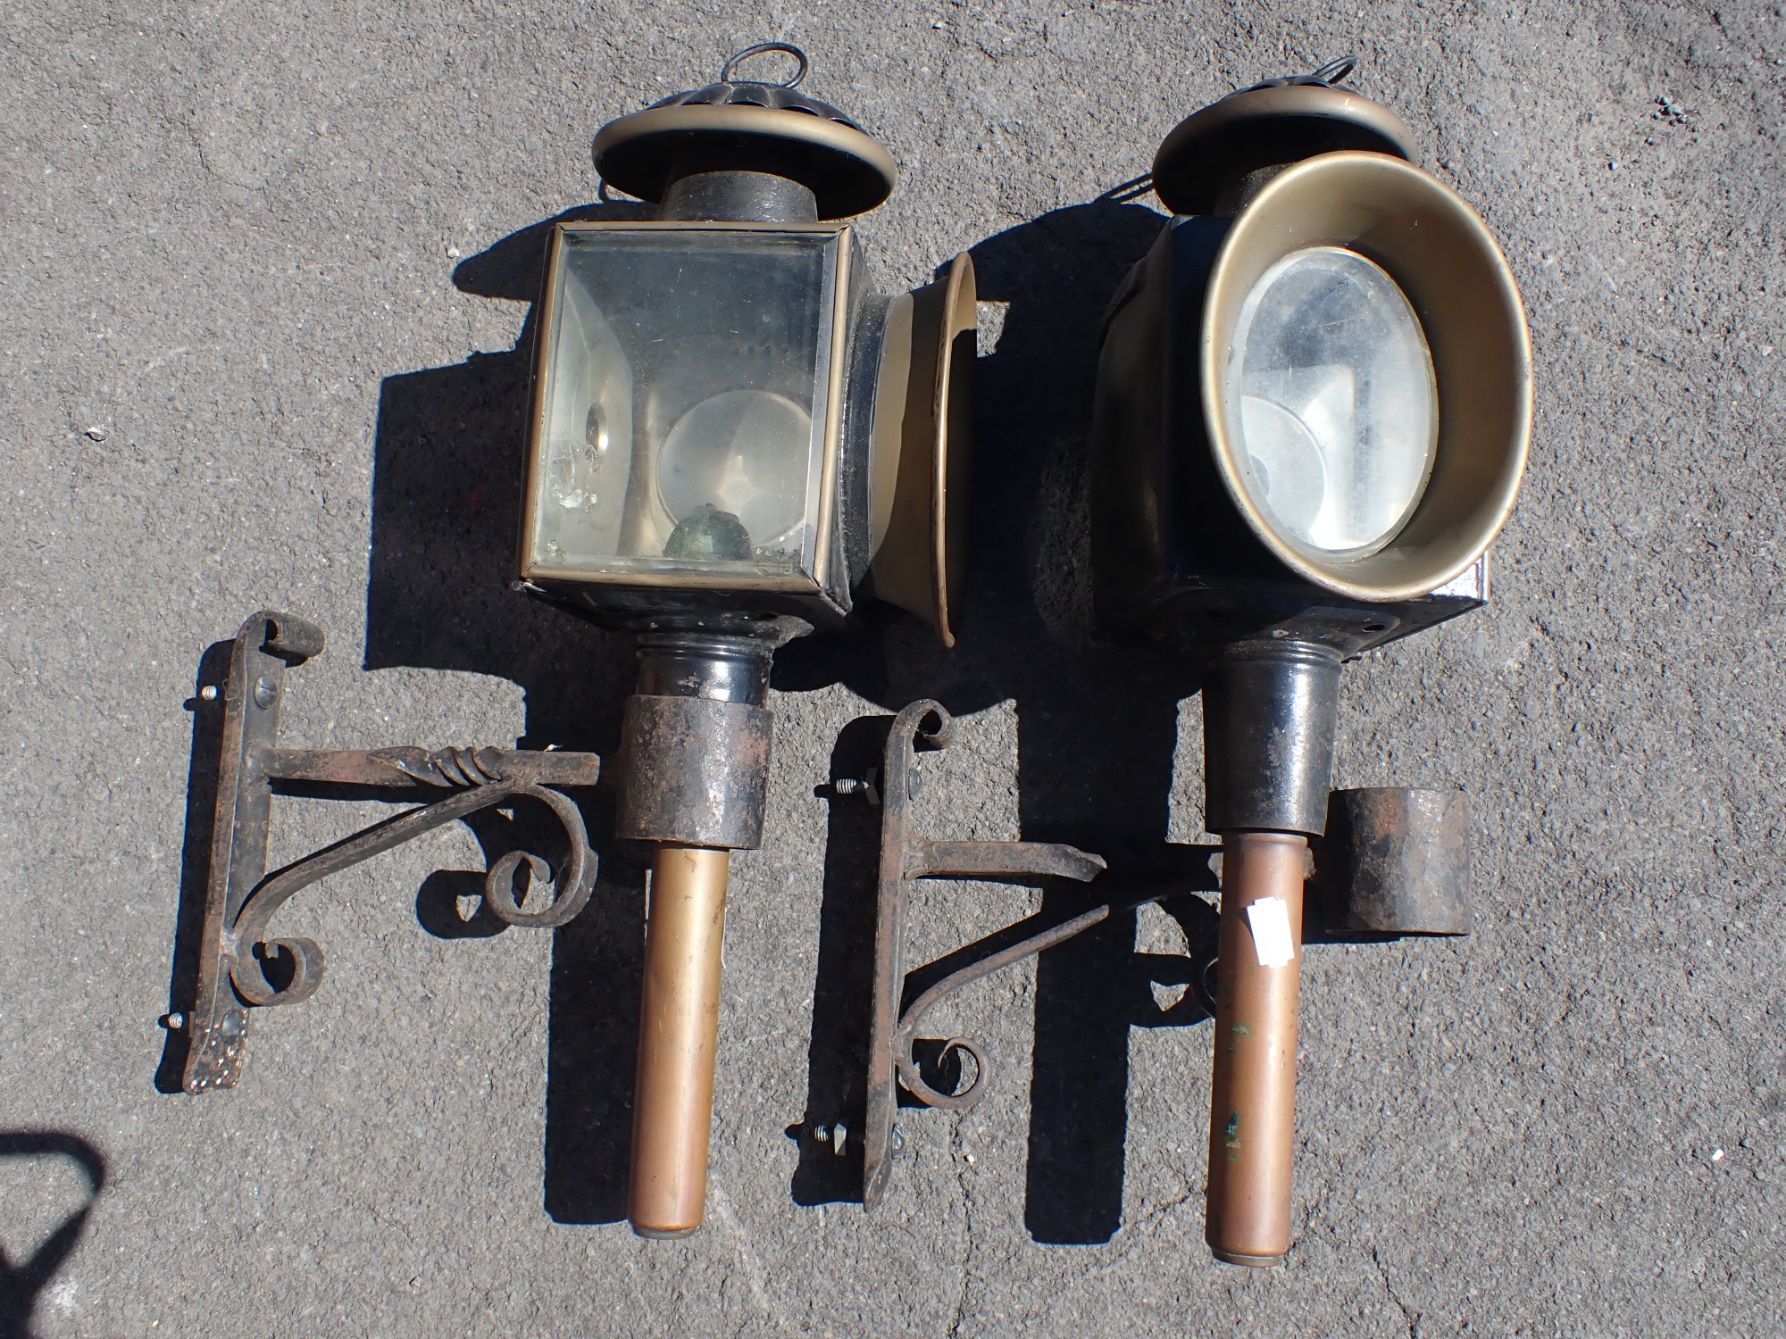 A PAIR OF 19TH CENTURY SPRING-LOADED CARRIAGE LAMPS